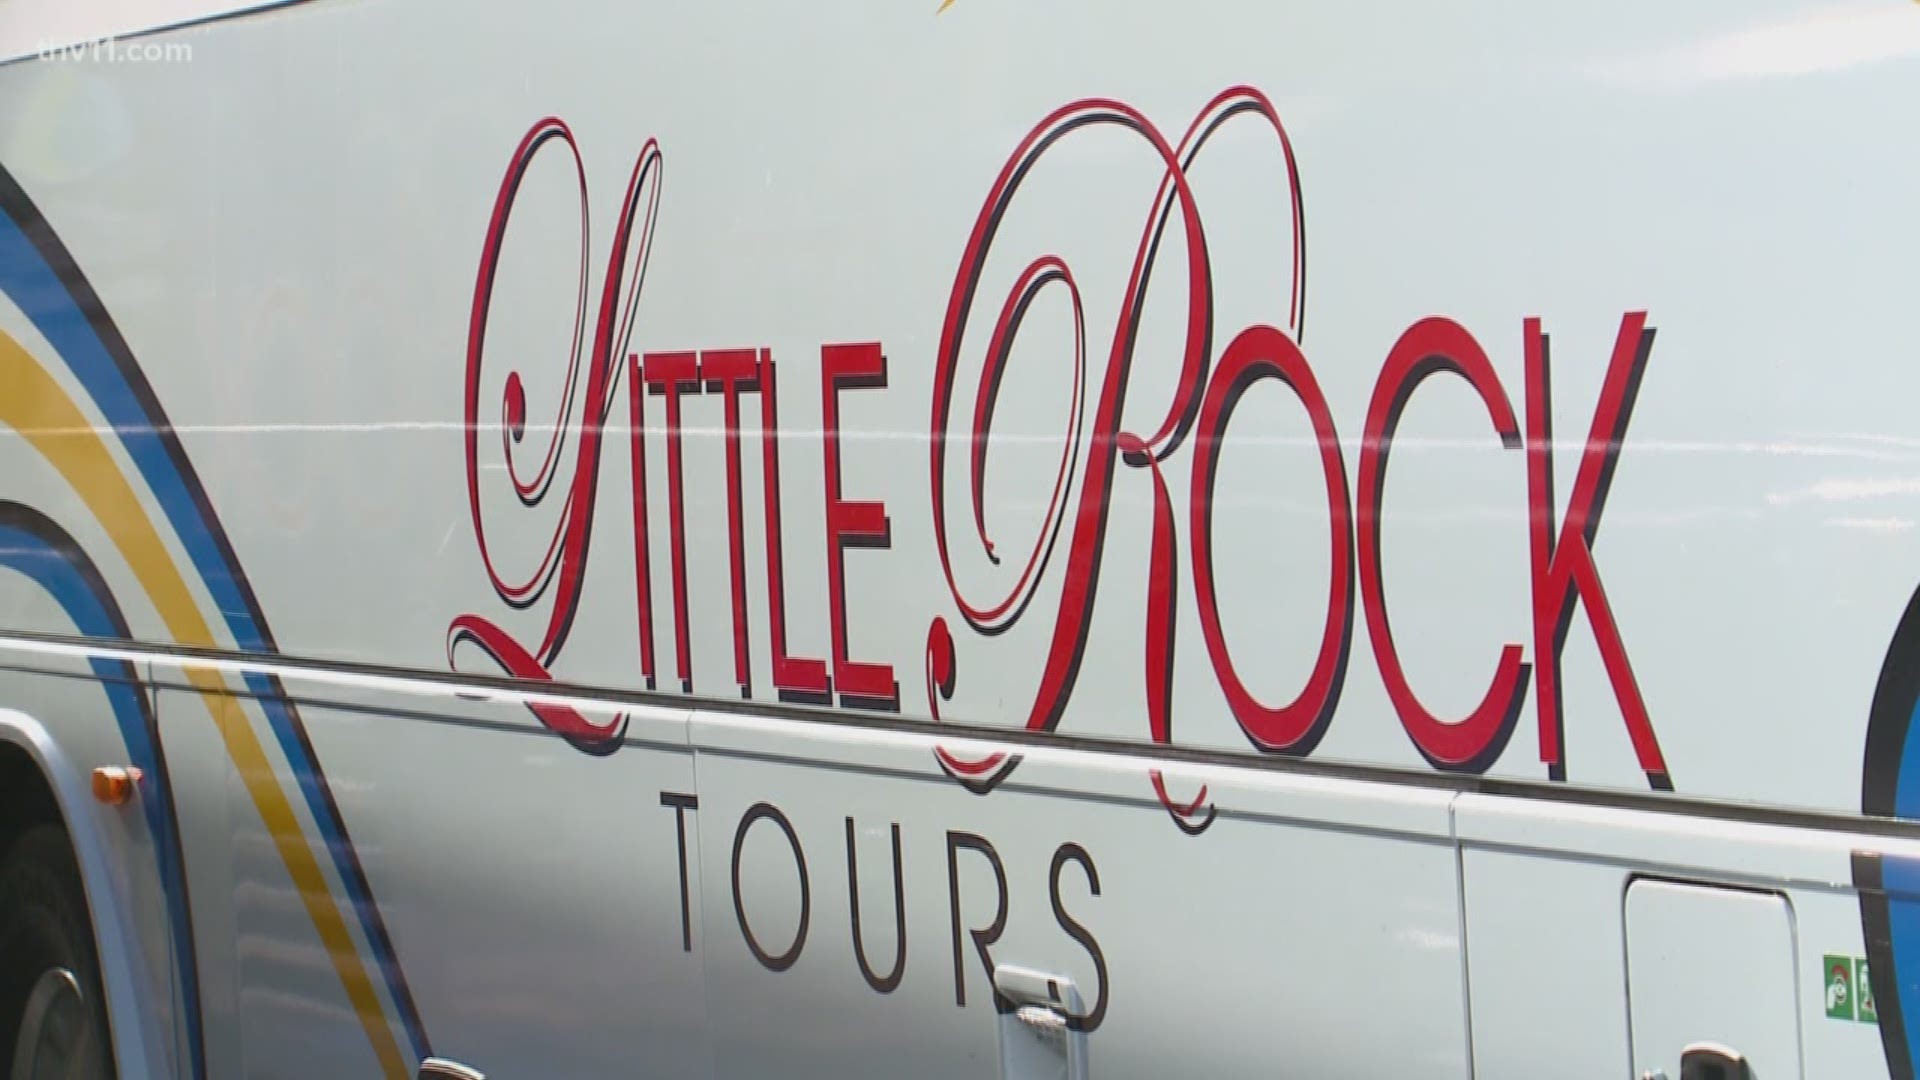 The Little Rock Tours and Travel buses will head to Atlanta to help transport the Super Bowl teams' family members to all the special pre-game events.